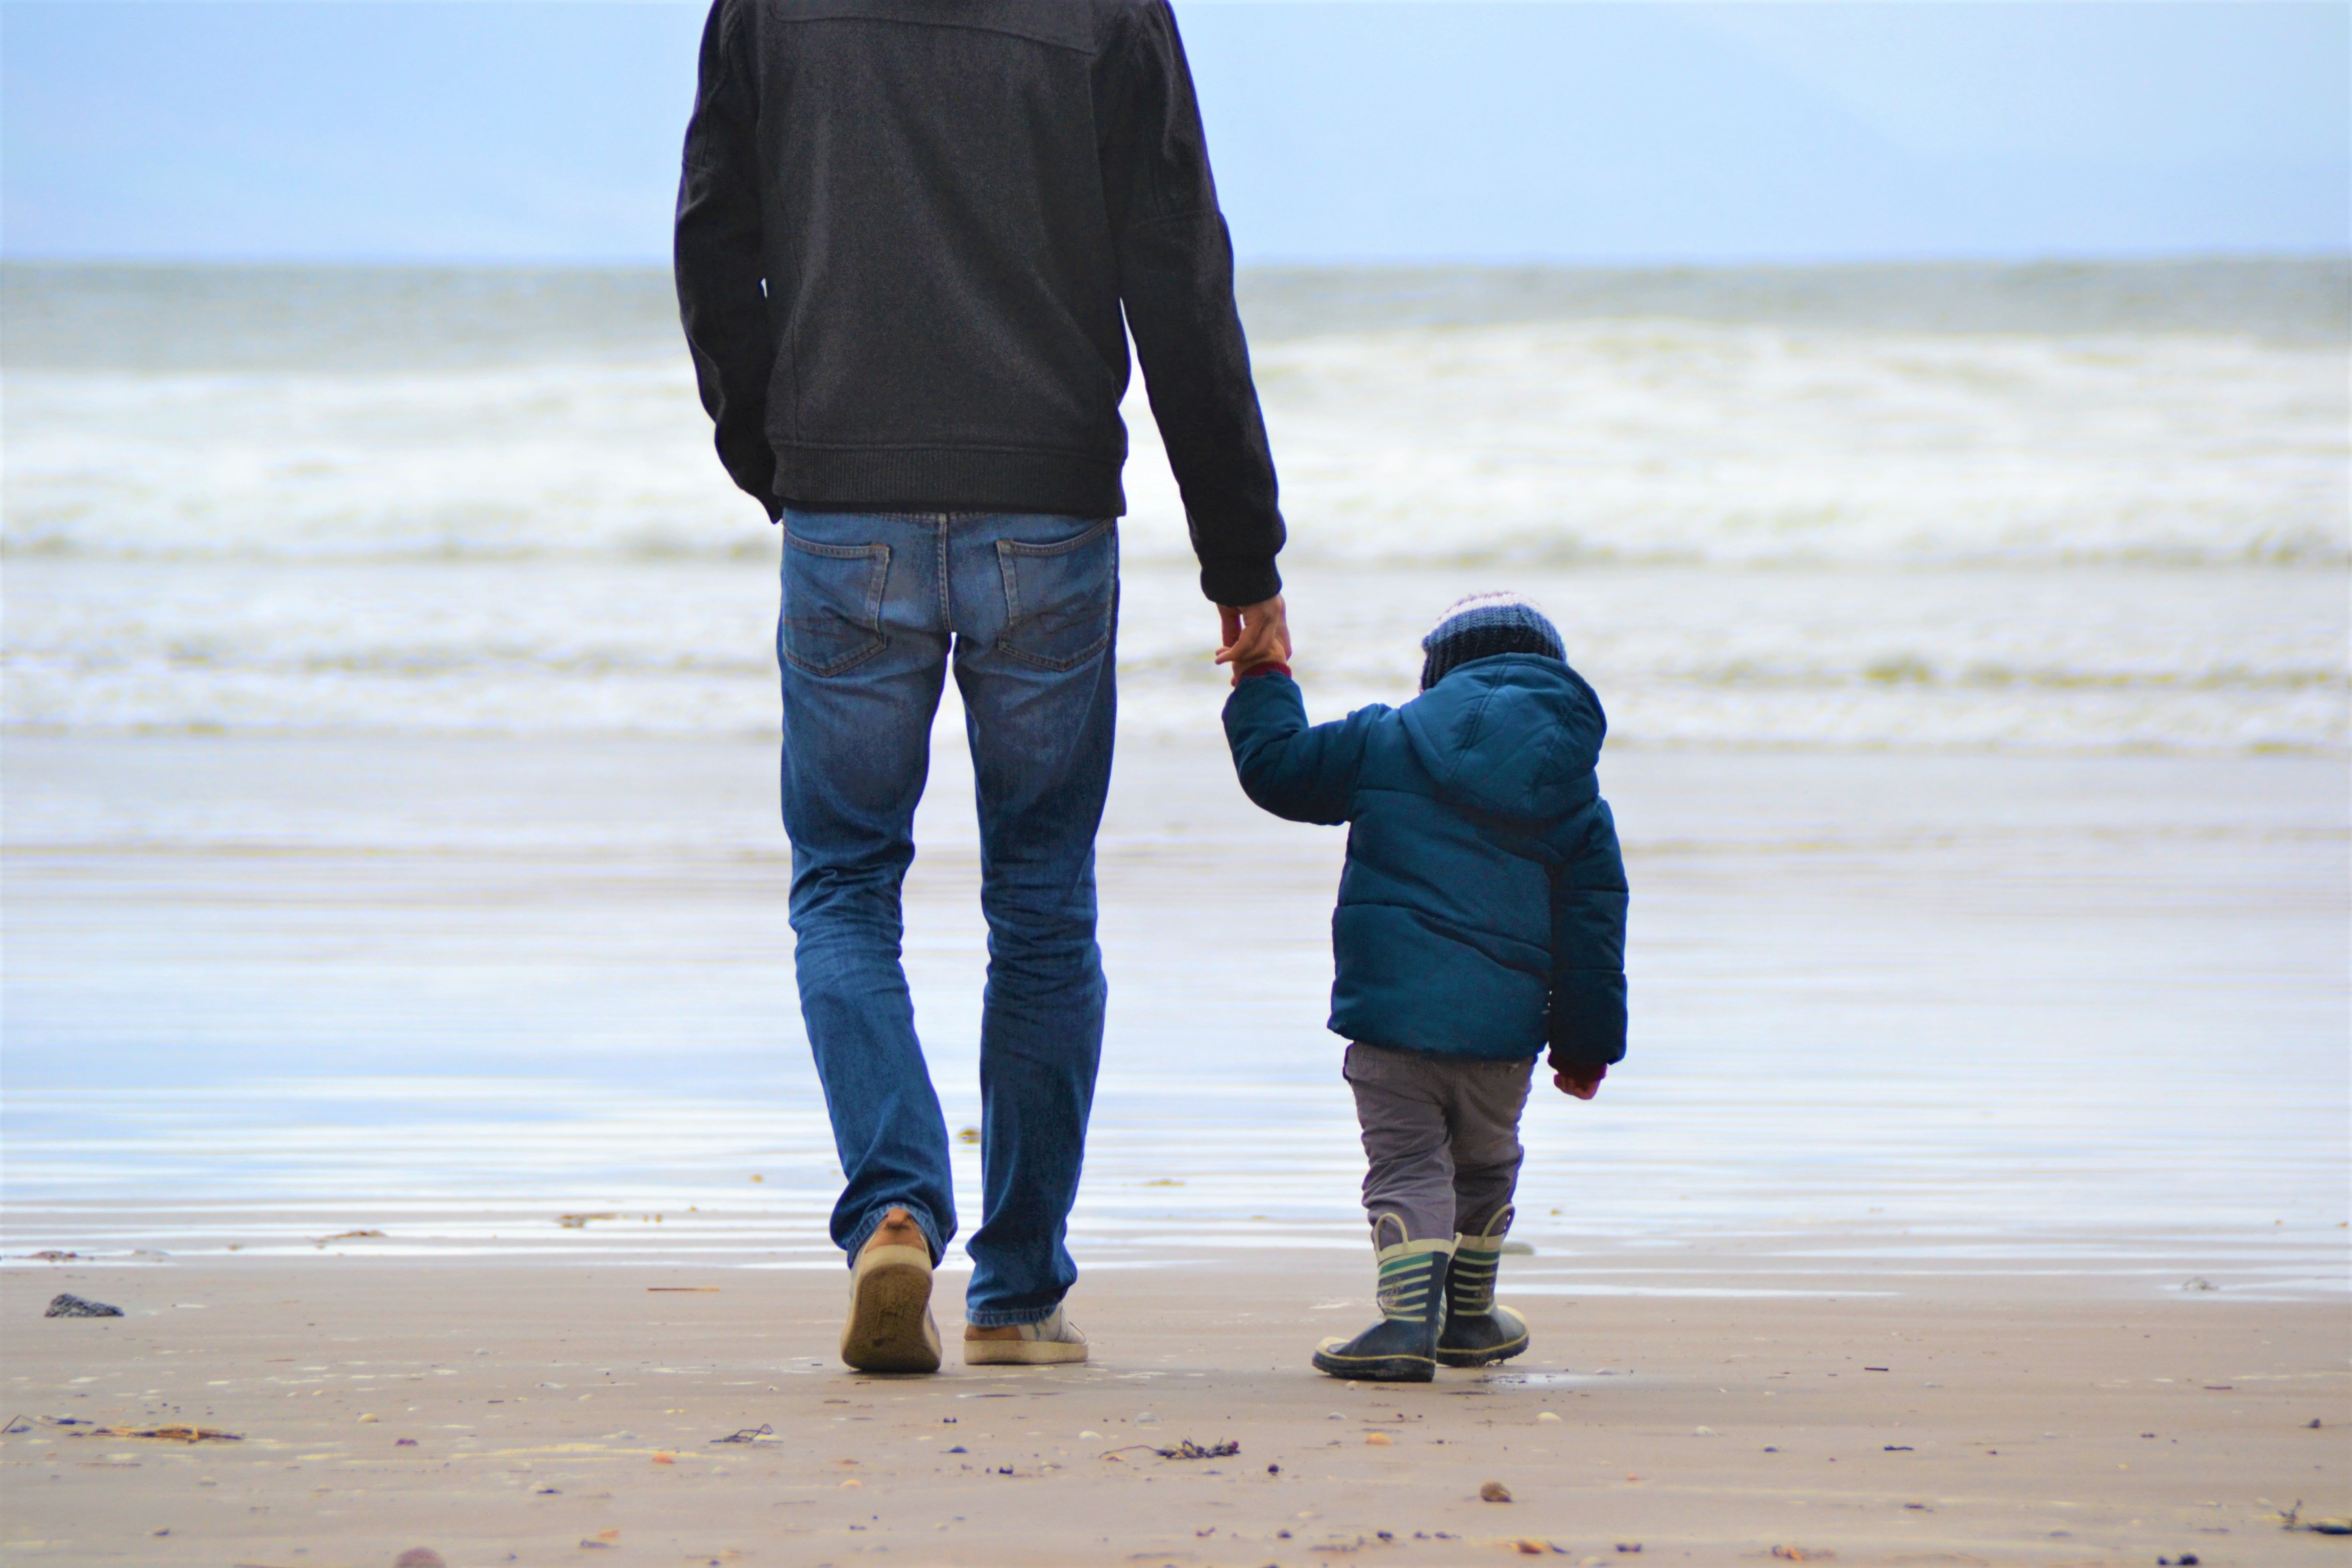 A father and son walking hand in hand | Source: Unsplash.com